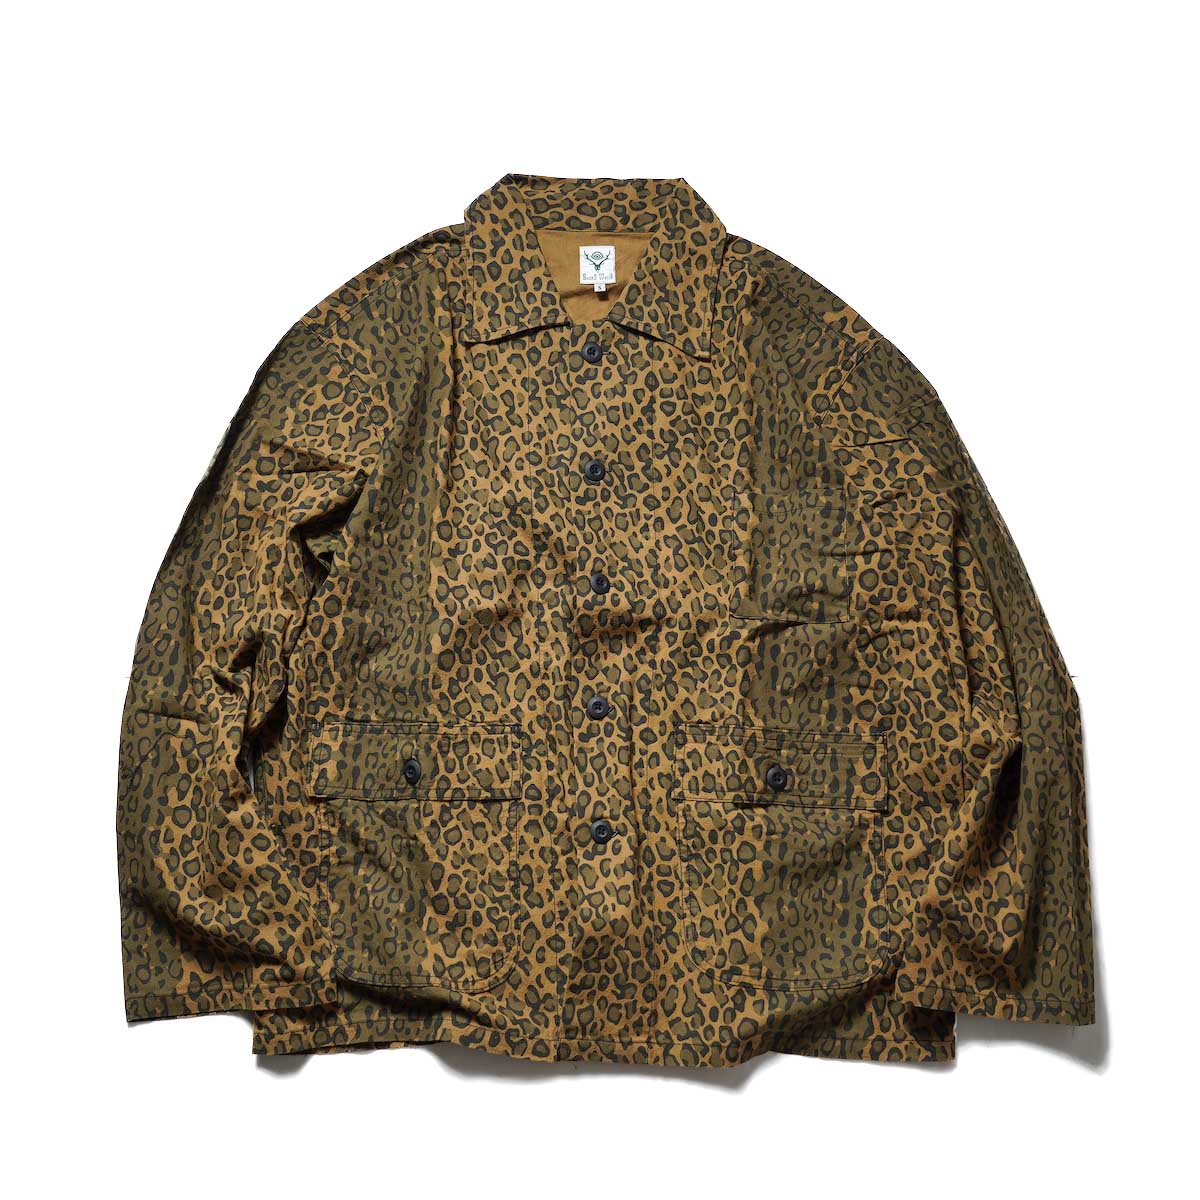 South2 West8 / HUNTING SHIRT - FLANNEL PT. (Leopard)